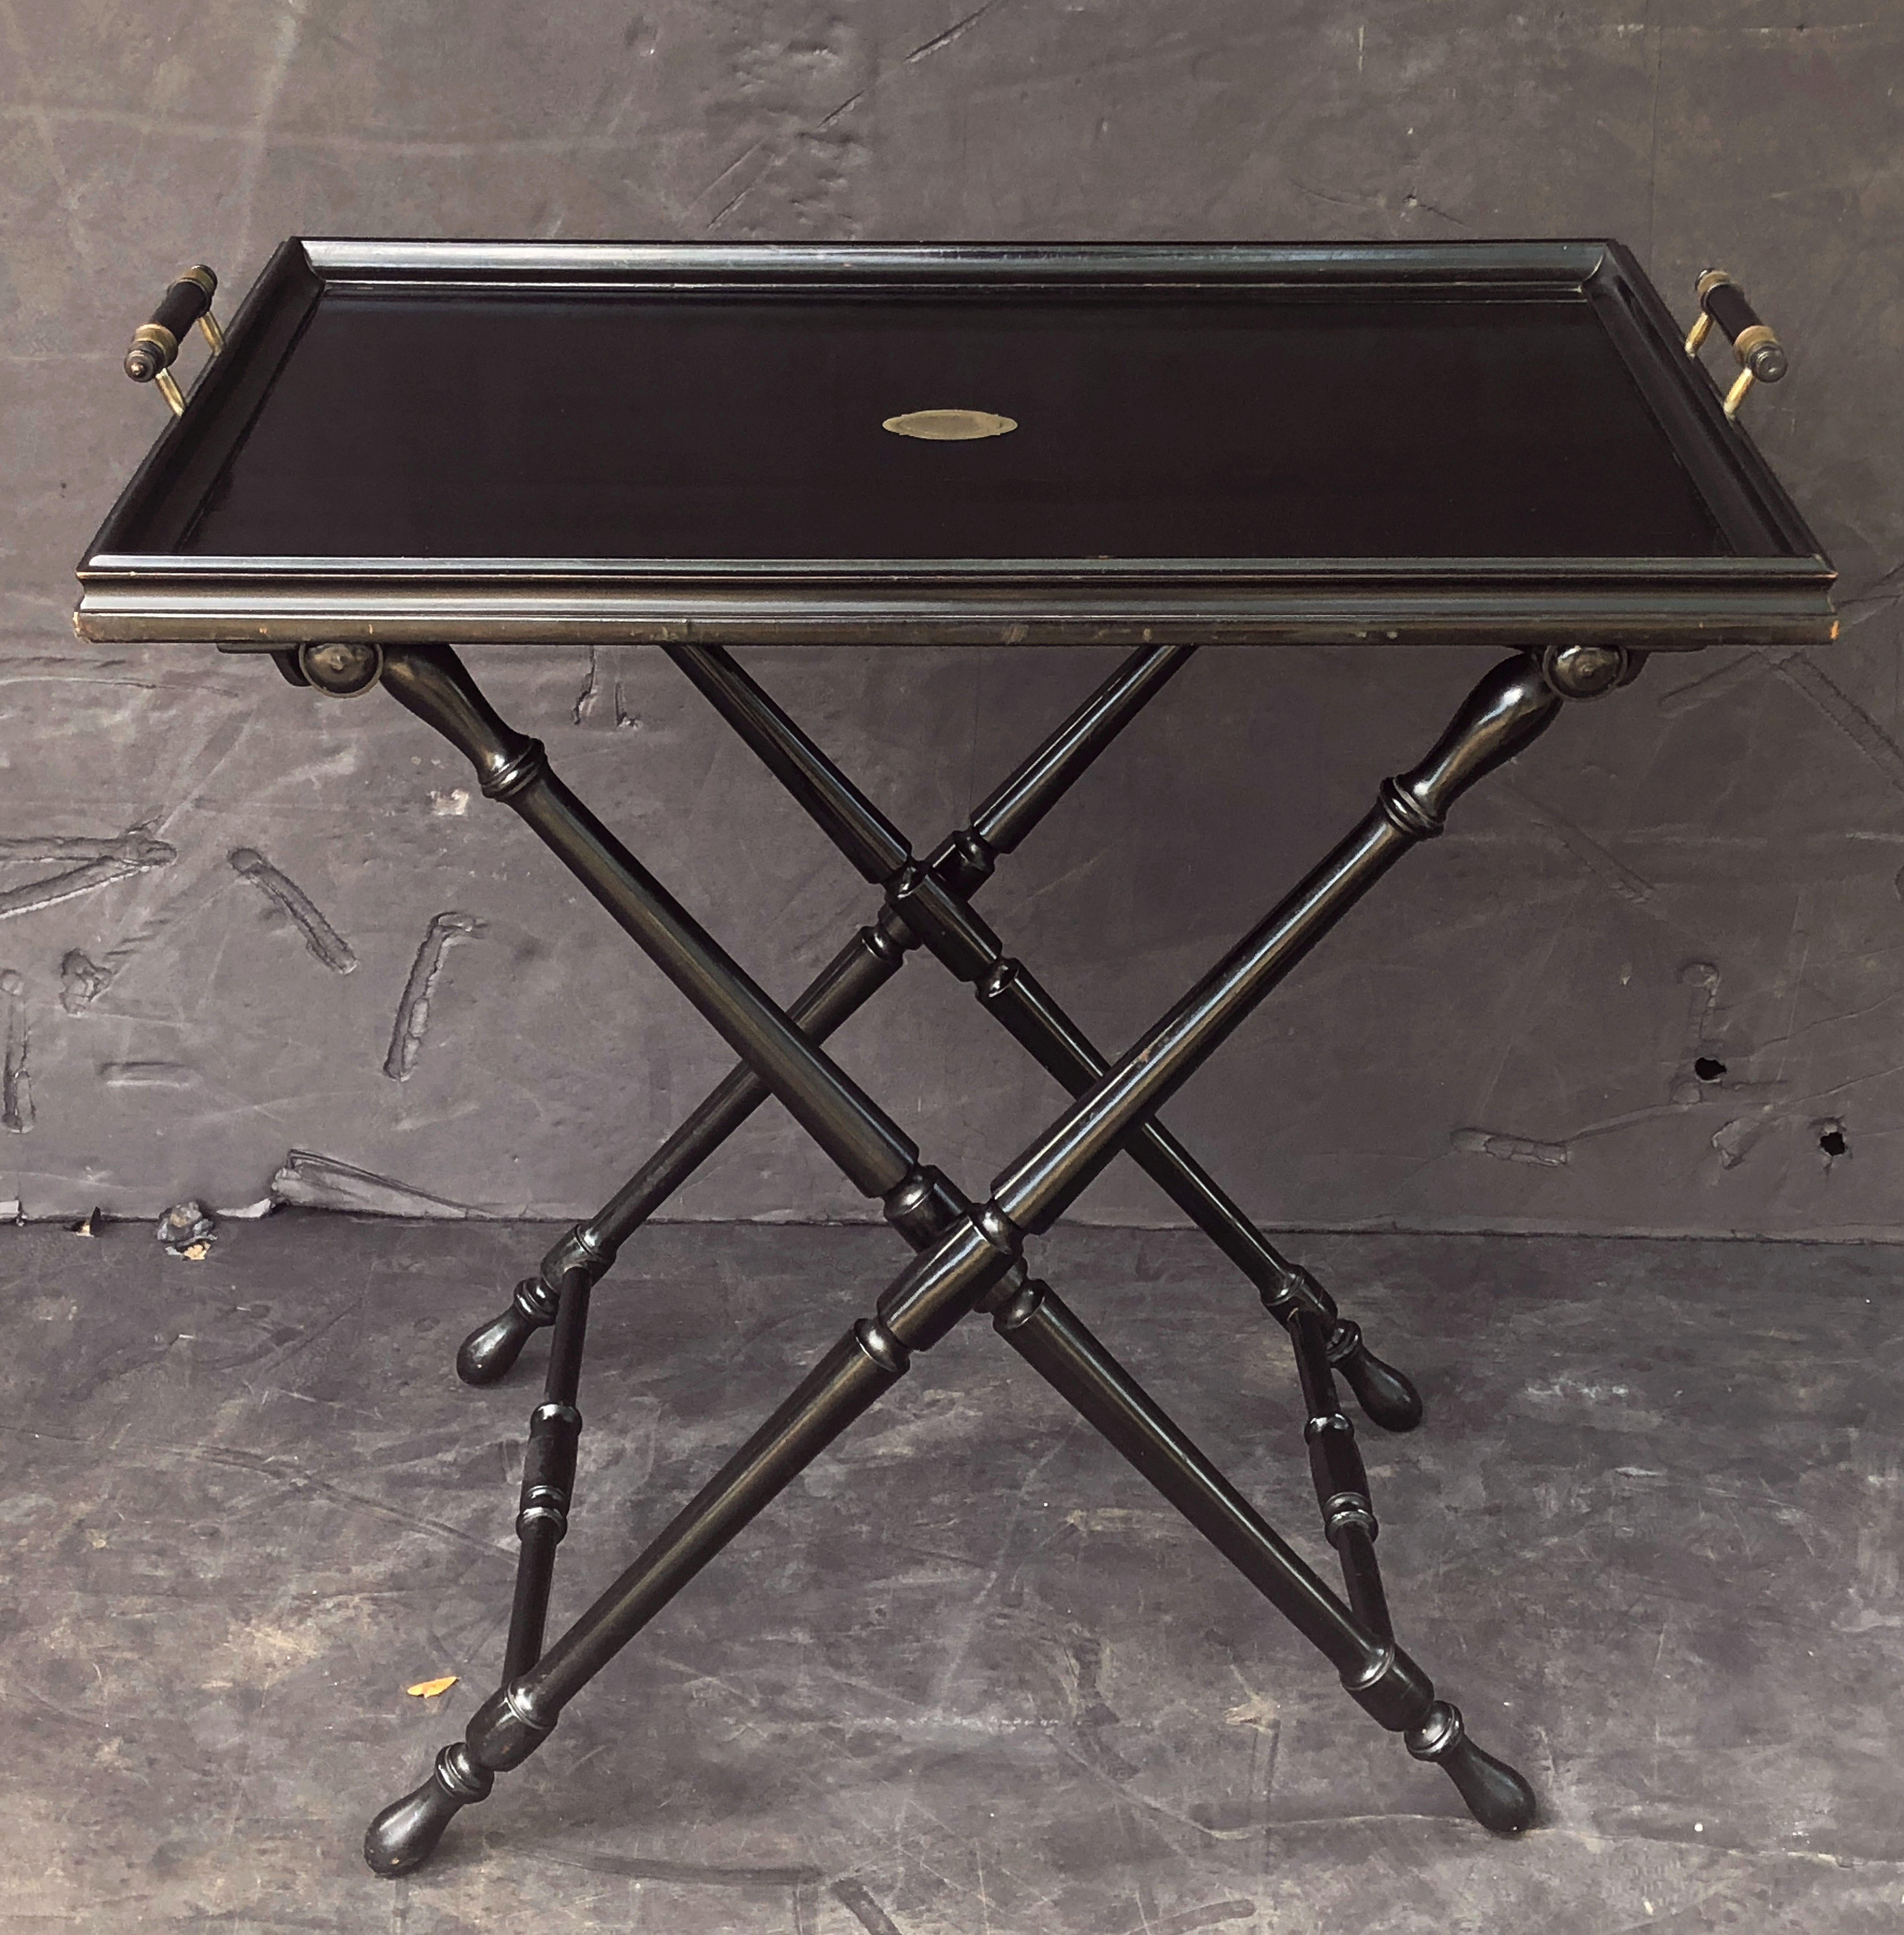 A fine French butler's tray table on stand, featuring a black lacquer or ebonized rectangular serving tray set upon a folding X-shaped stand.
The tray with a raised, moulded edge with a brass cartouche in the centre and brass and wood handles. The